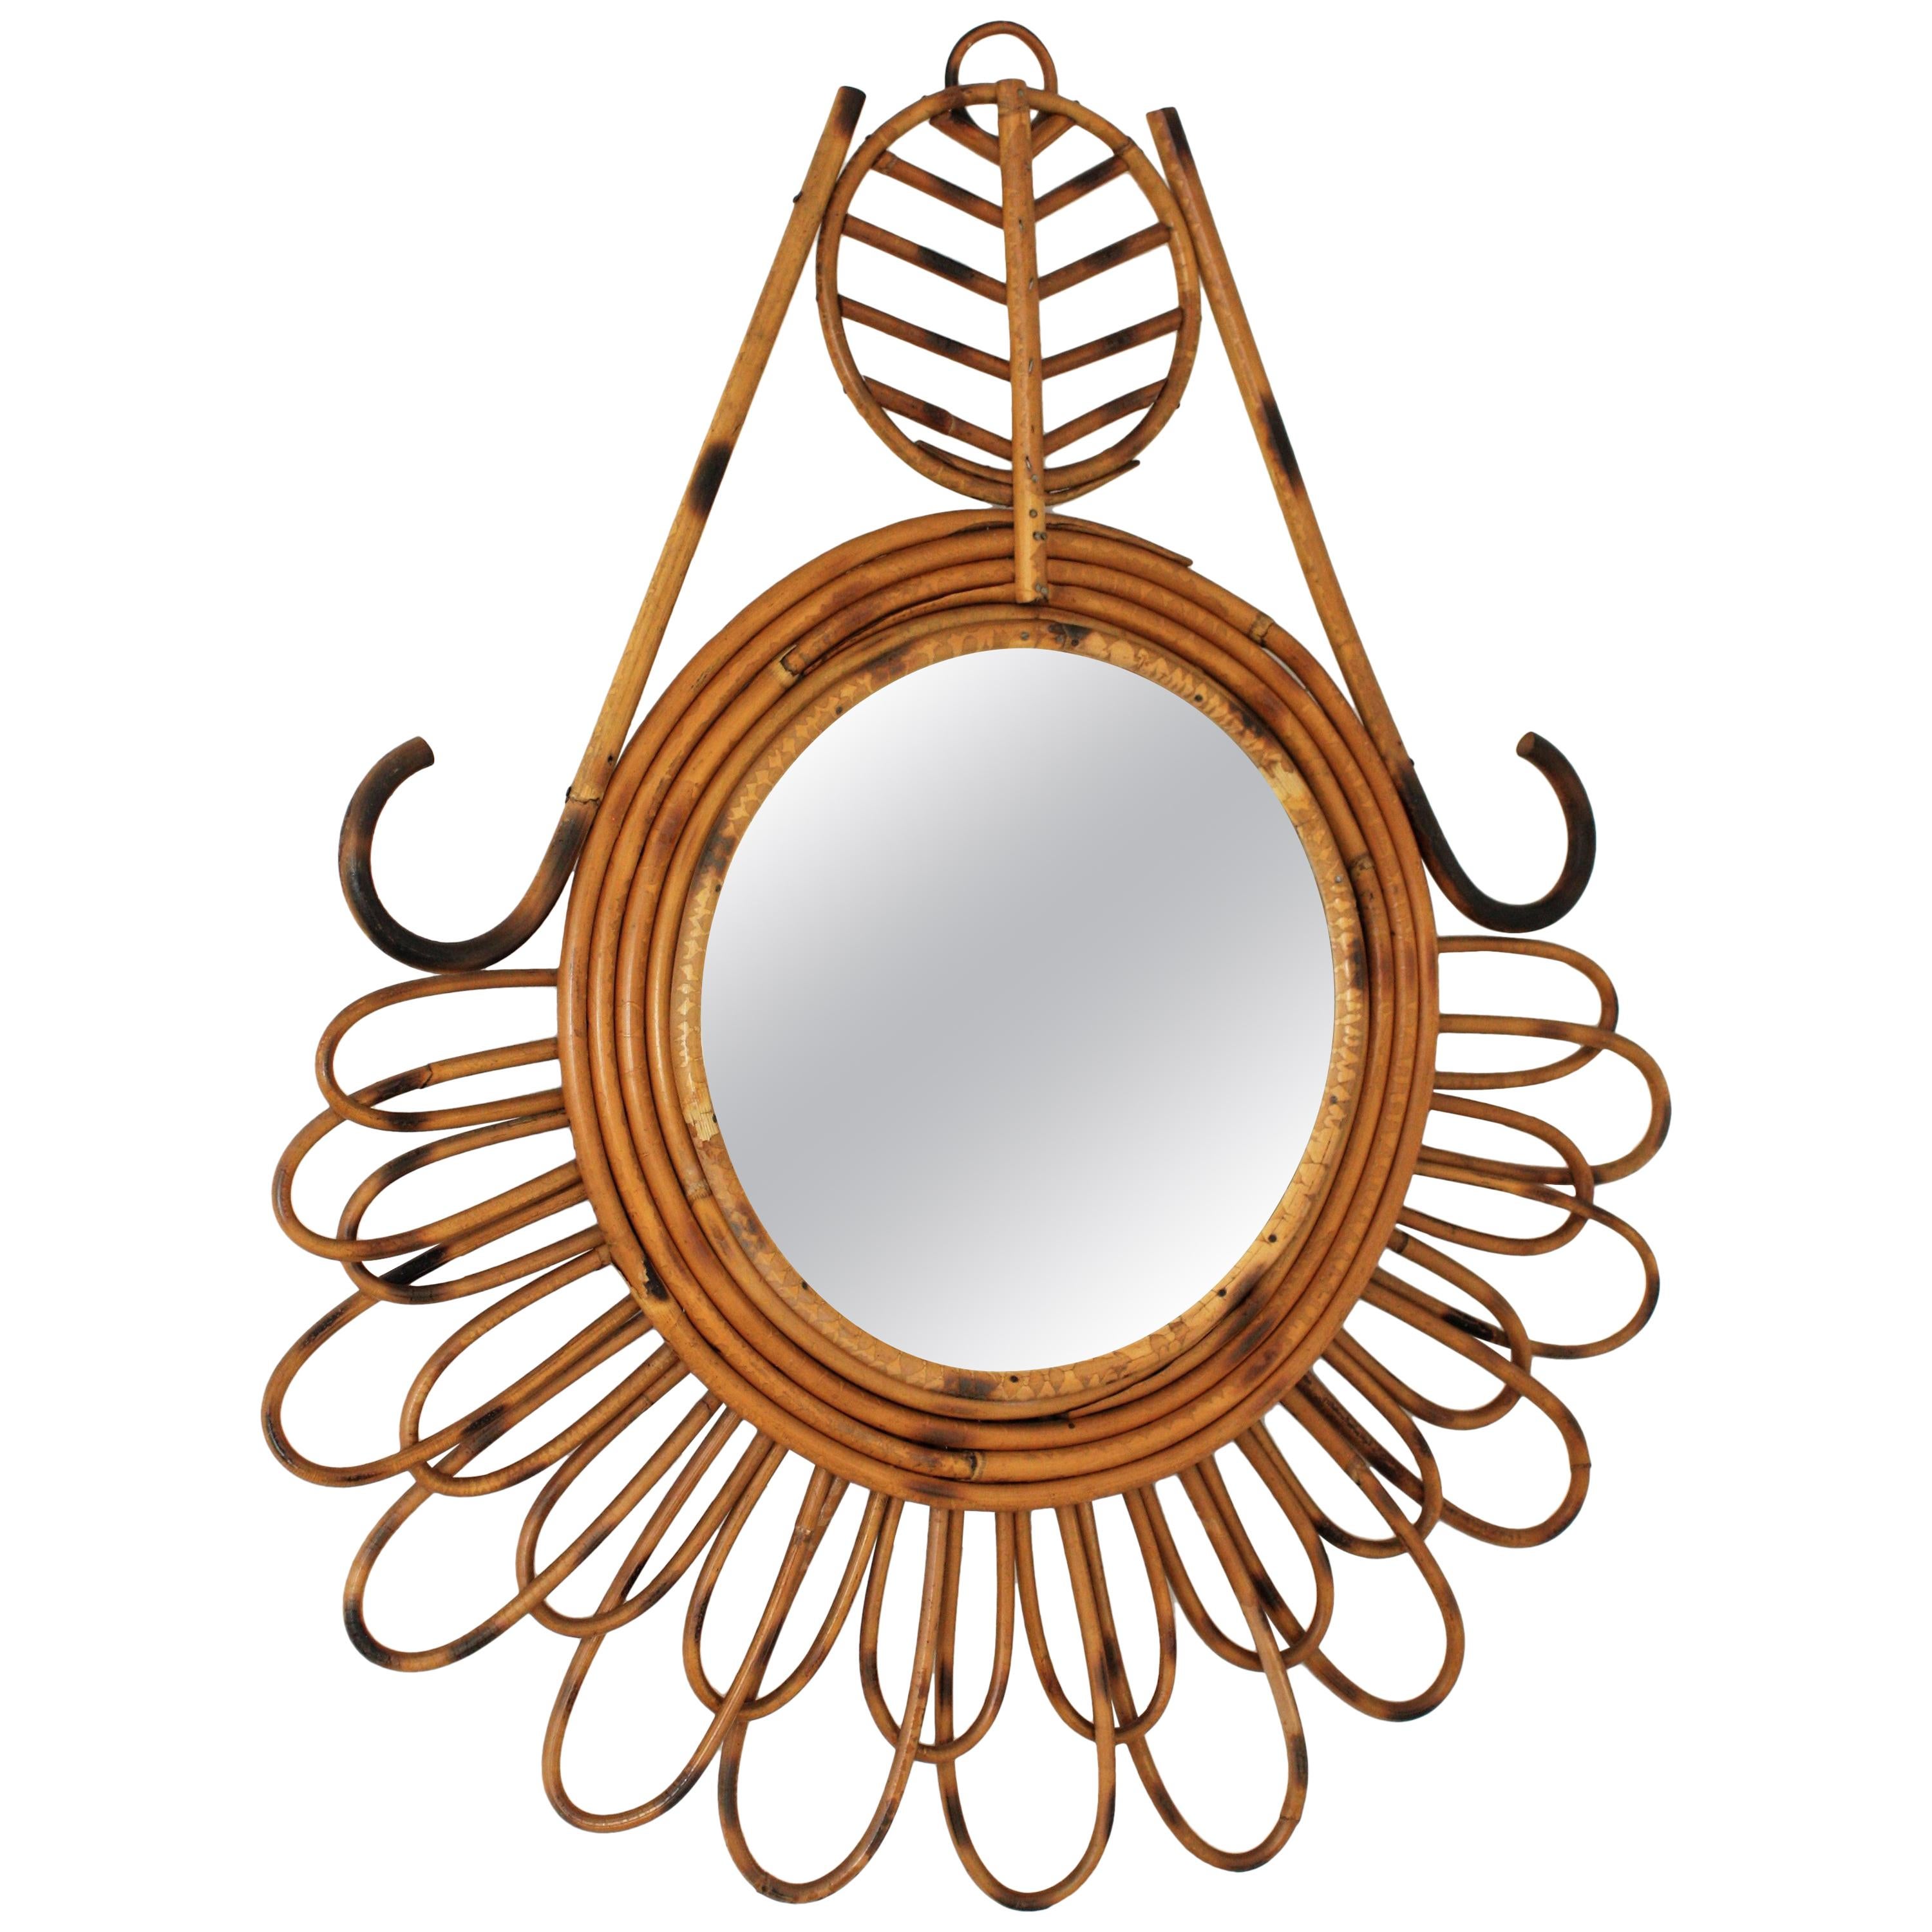 Unique Mediterranean style handcrafted rattan abstract mirror, France, 1950-1960.
This mirror has rattan petals in two sizes, an abstract decoration adorning the frame and five rattan loops surrounding a circular glass.
Dimensions of the glass: